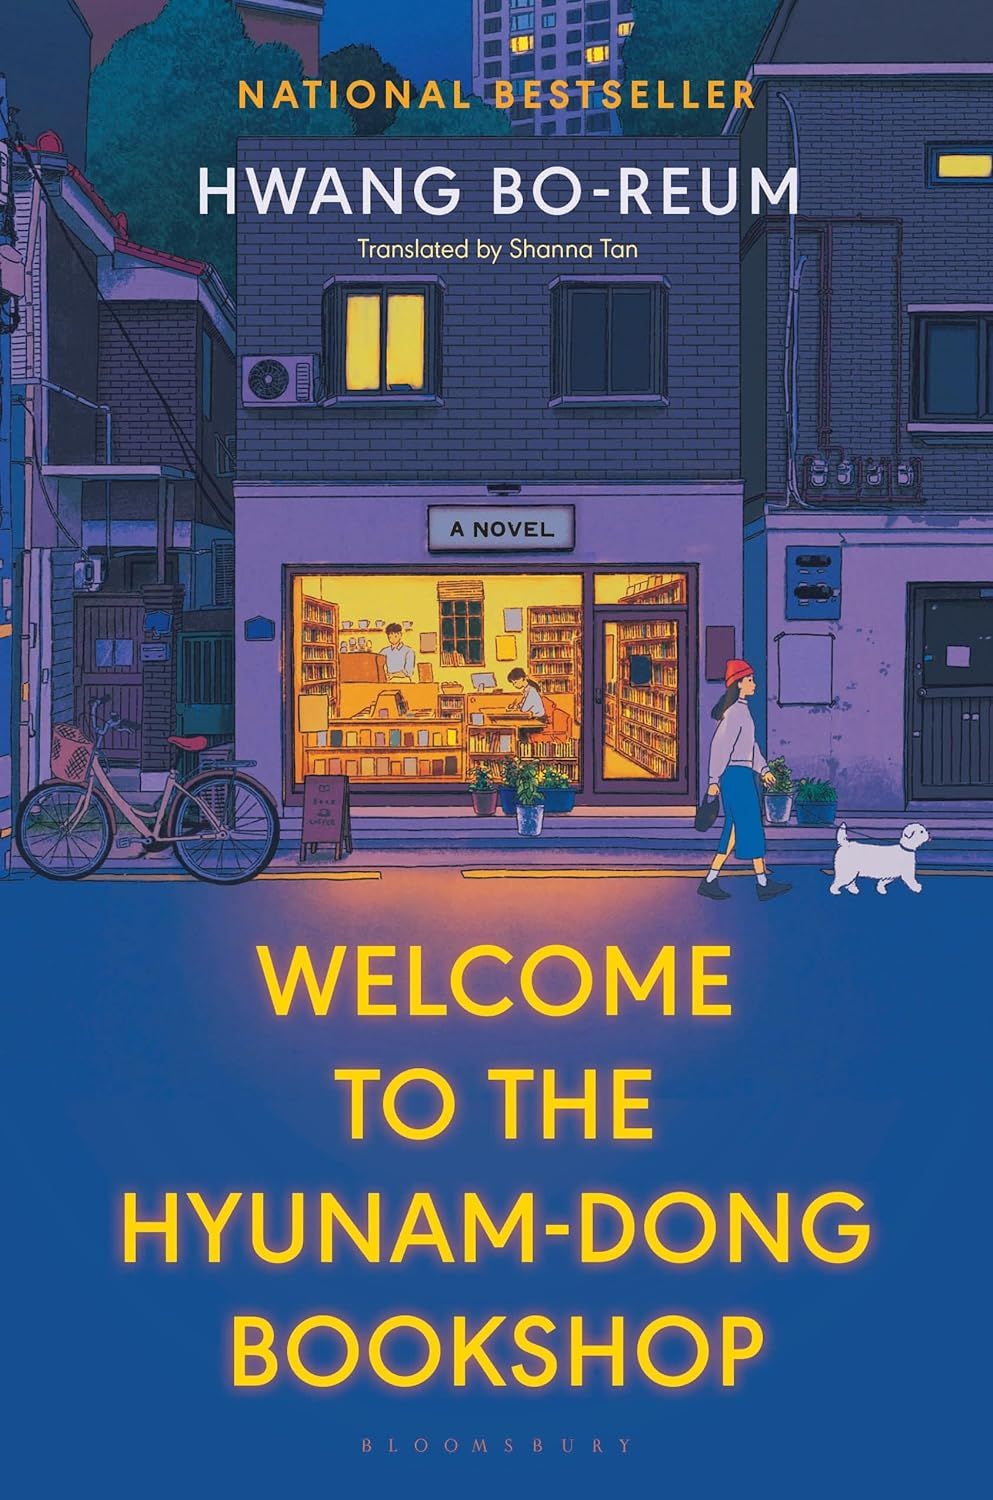 Welcome to the Hyunam-dong Bookshop by Hwang Bo-reum, translated by Shanna Tan - book cover